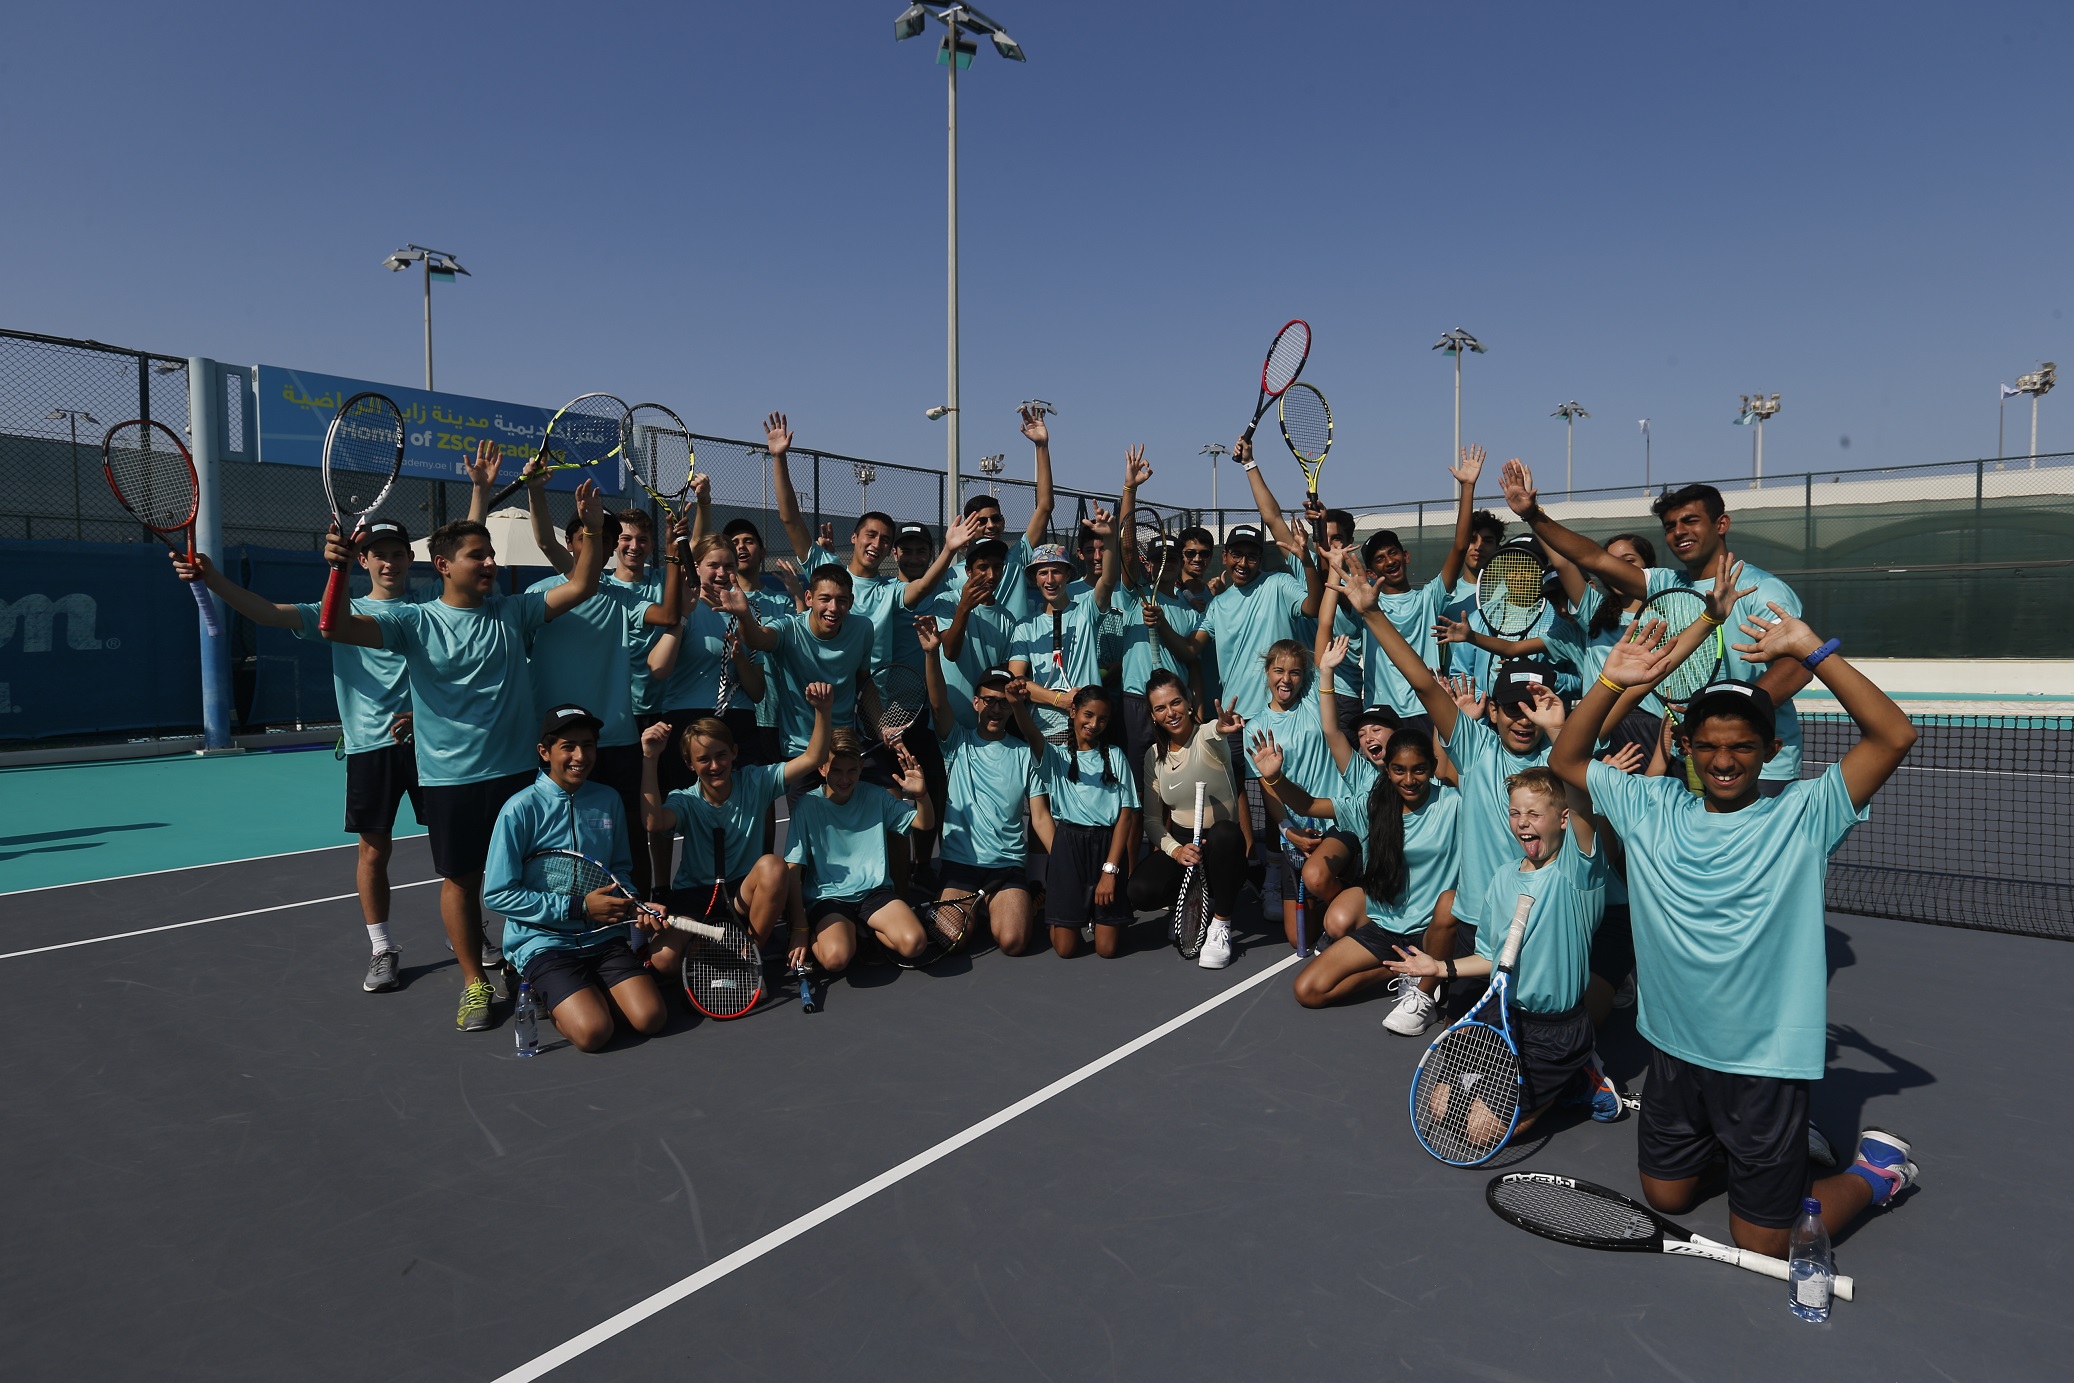 Game, Set, Match! 12th Mubadala World Tennis Championship Serves Up Enthralling On-Court Action And Vibrant, Interactive Family Entertainment